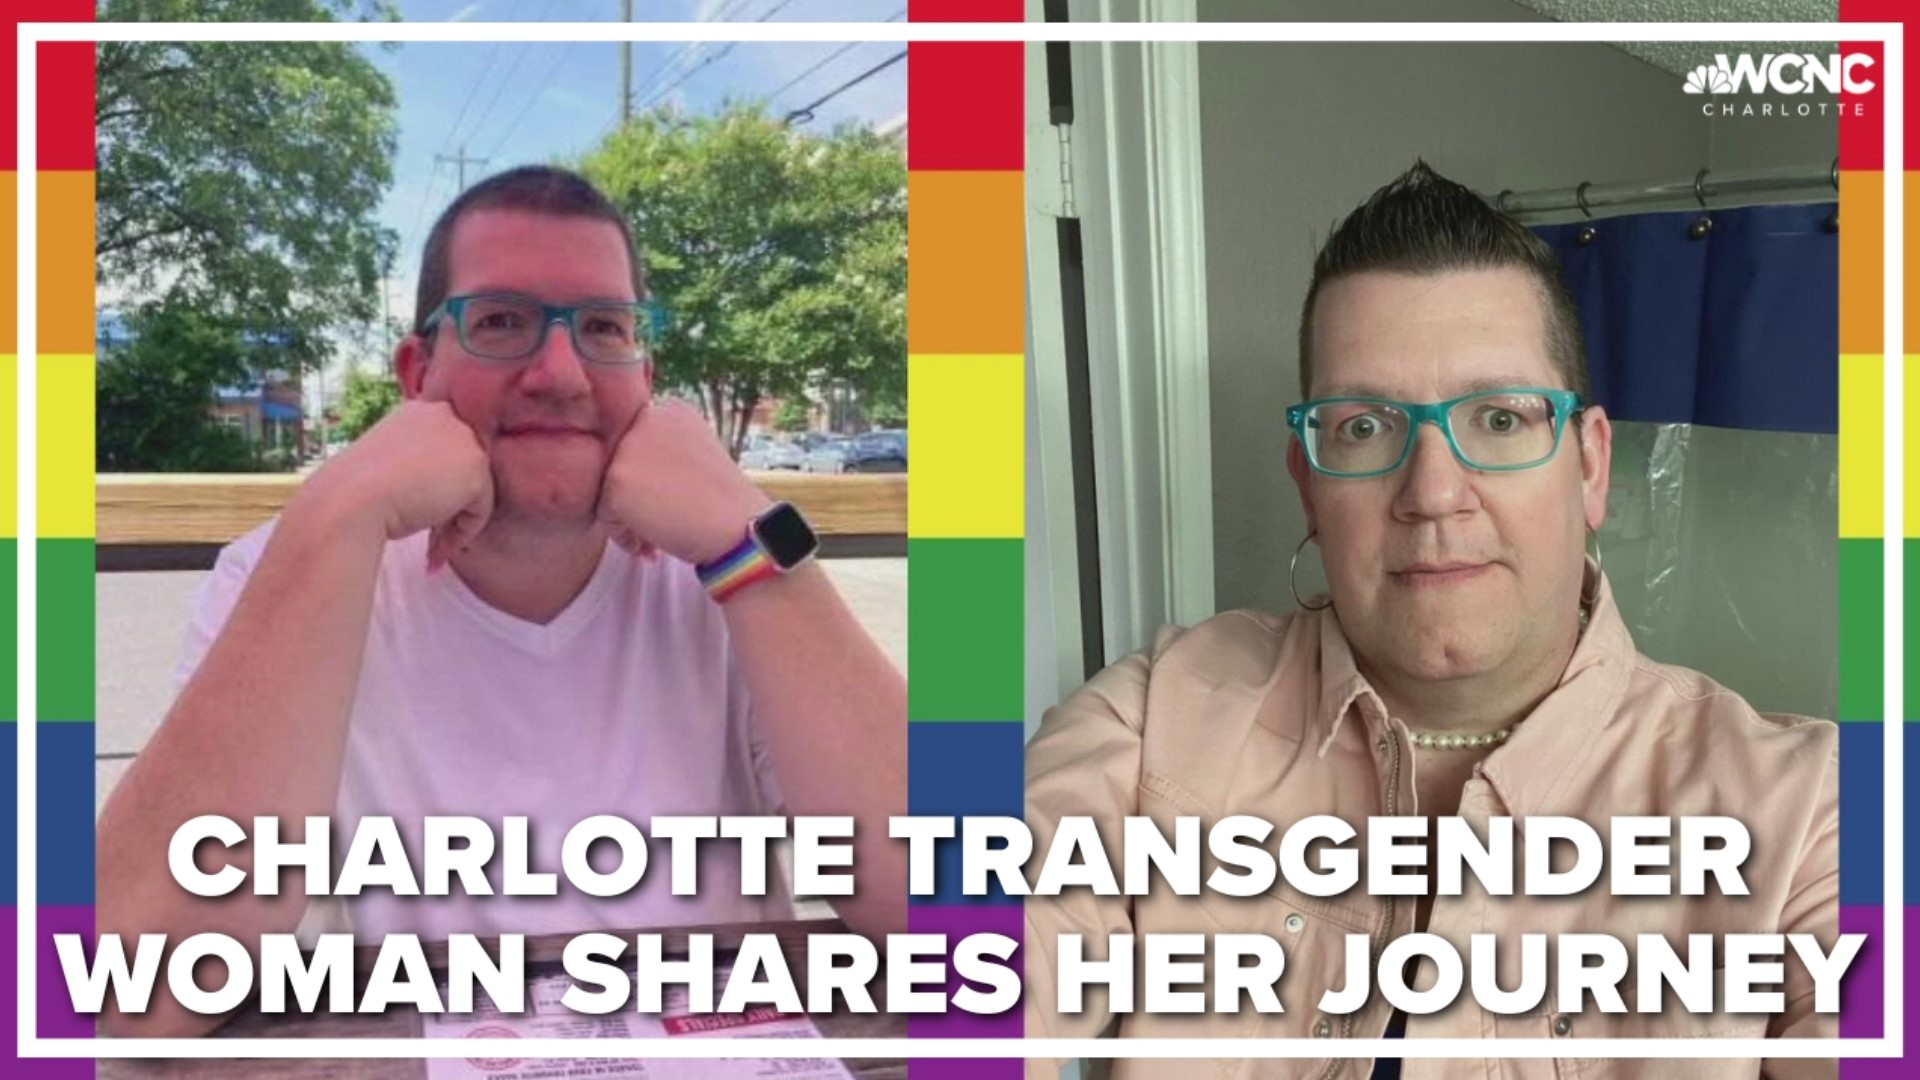 A transgender Charlottean is opening up about her journey, and how she finally feels supported at work and in her personal life.